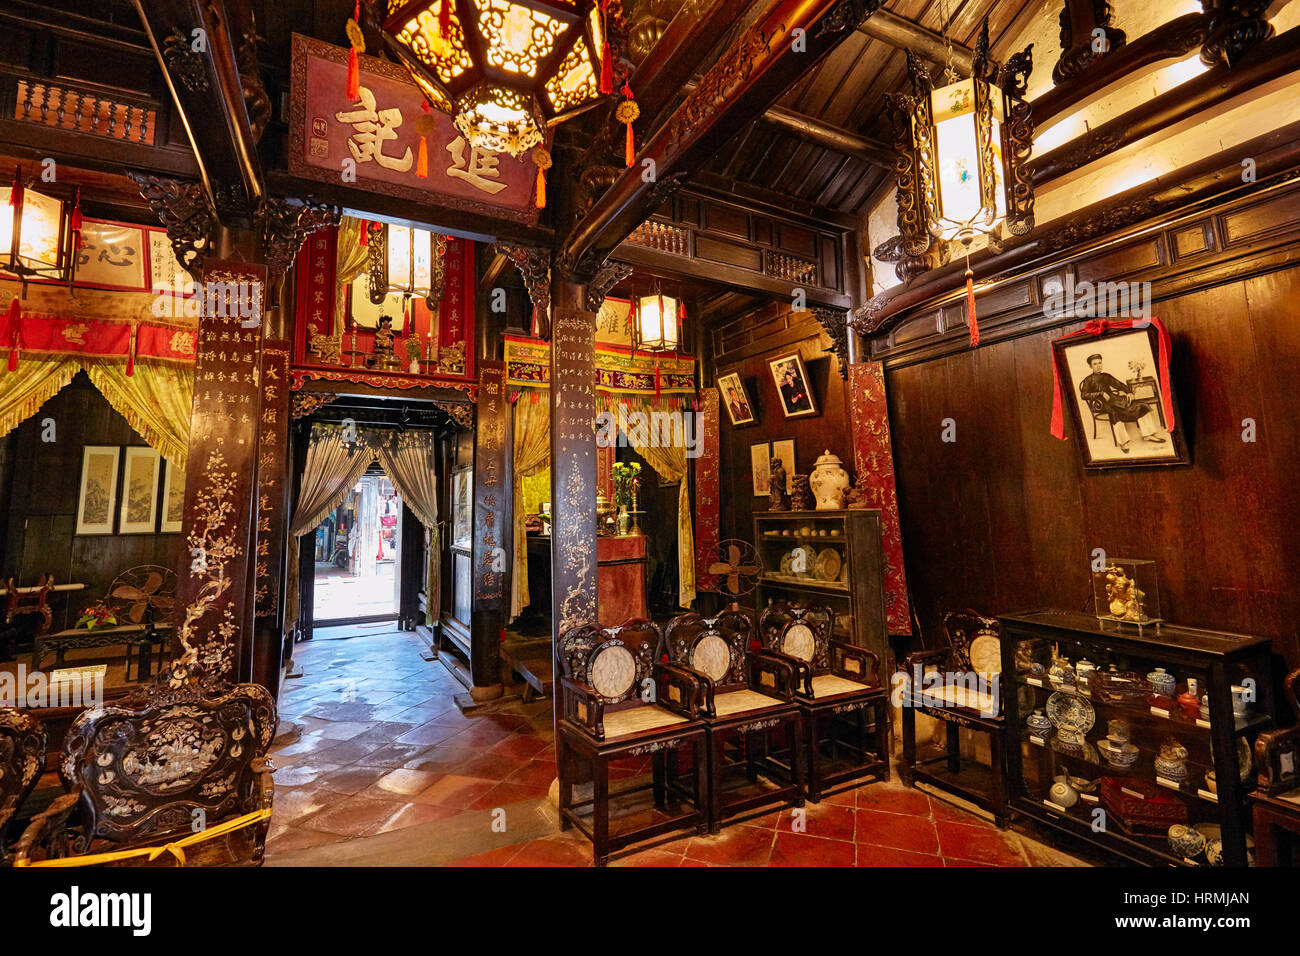 Interior view of the Old House of Tan Ky. Hoi An Ancient Town, Quang Nam Province, Vietnam. Stock Photo